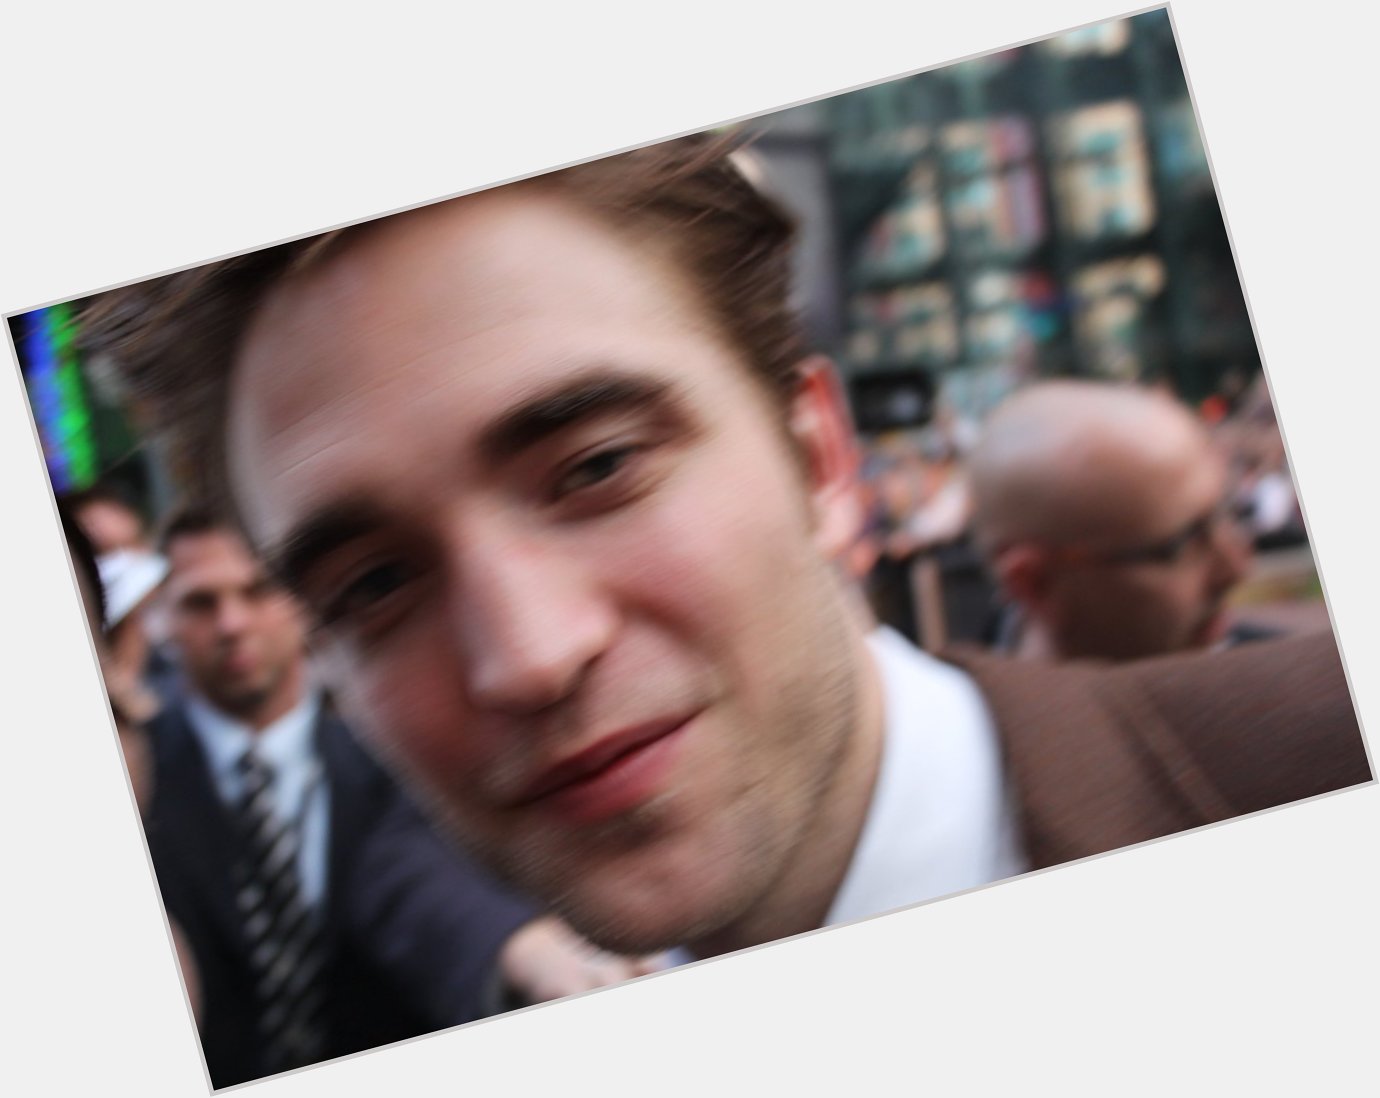 Happy birthday to these awkward fotos I took of Robert Pattinson in Berlin 